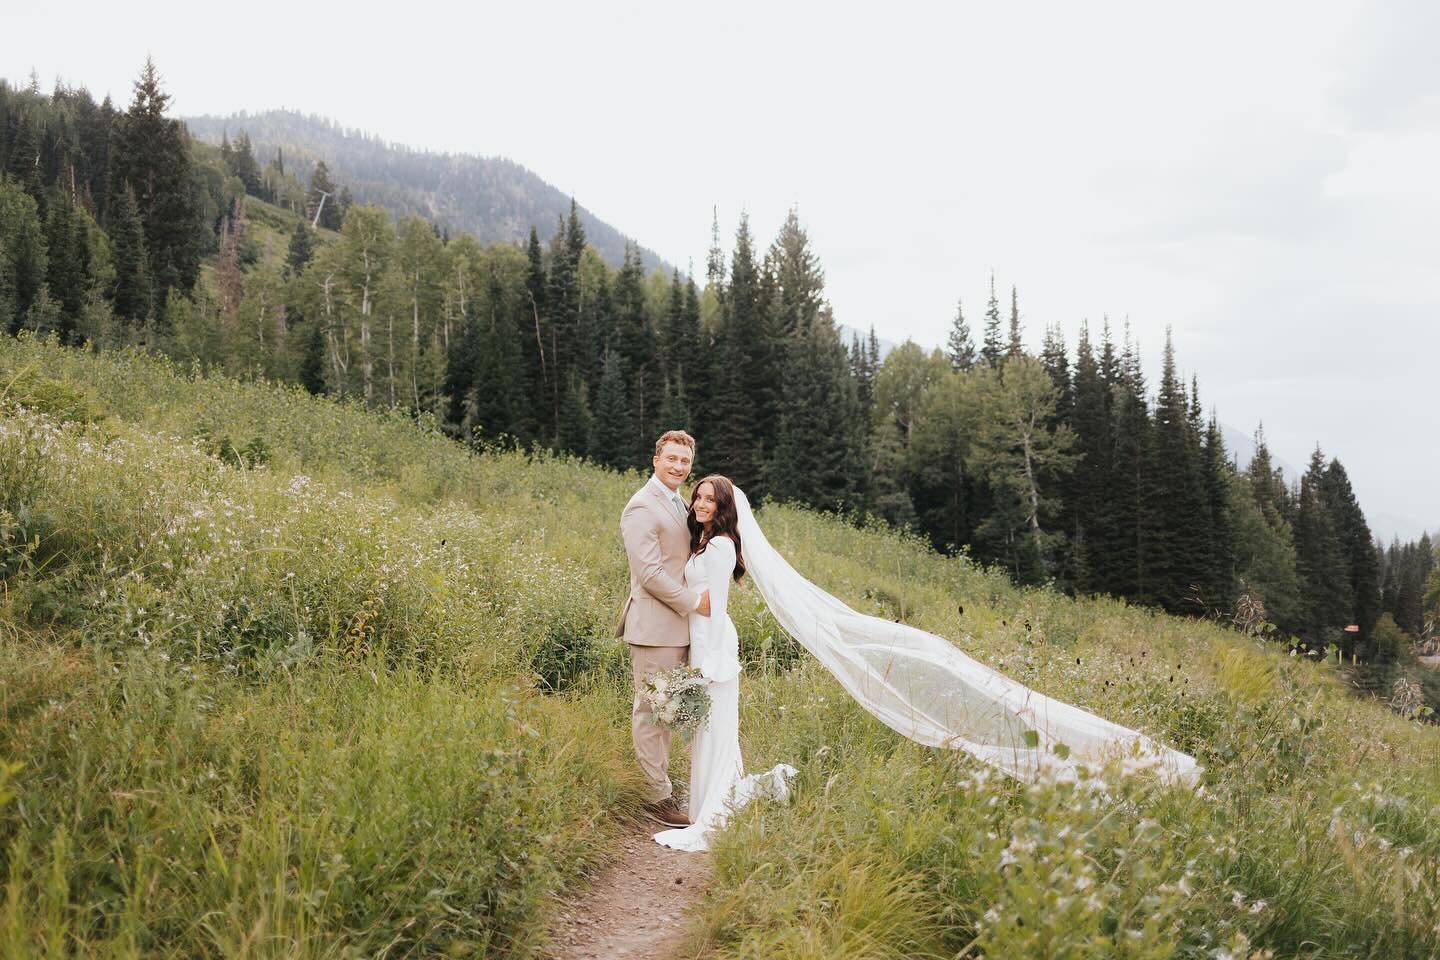 I love a good horizontal shot when the location is just too much to handle 🌲 
.
.
.
.
.
#slcweddingphotographer #utahengagements #draperphotographer #oremphotographer 
#parkcityphotographer #utahvalleyphotographer #southjordanphotographer #slcphotog